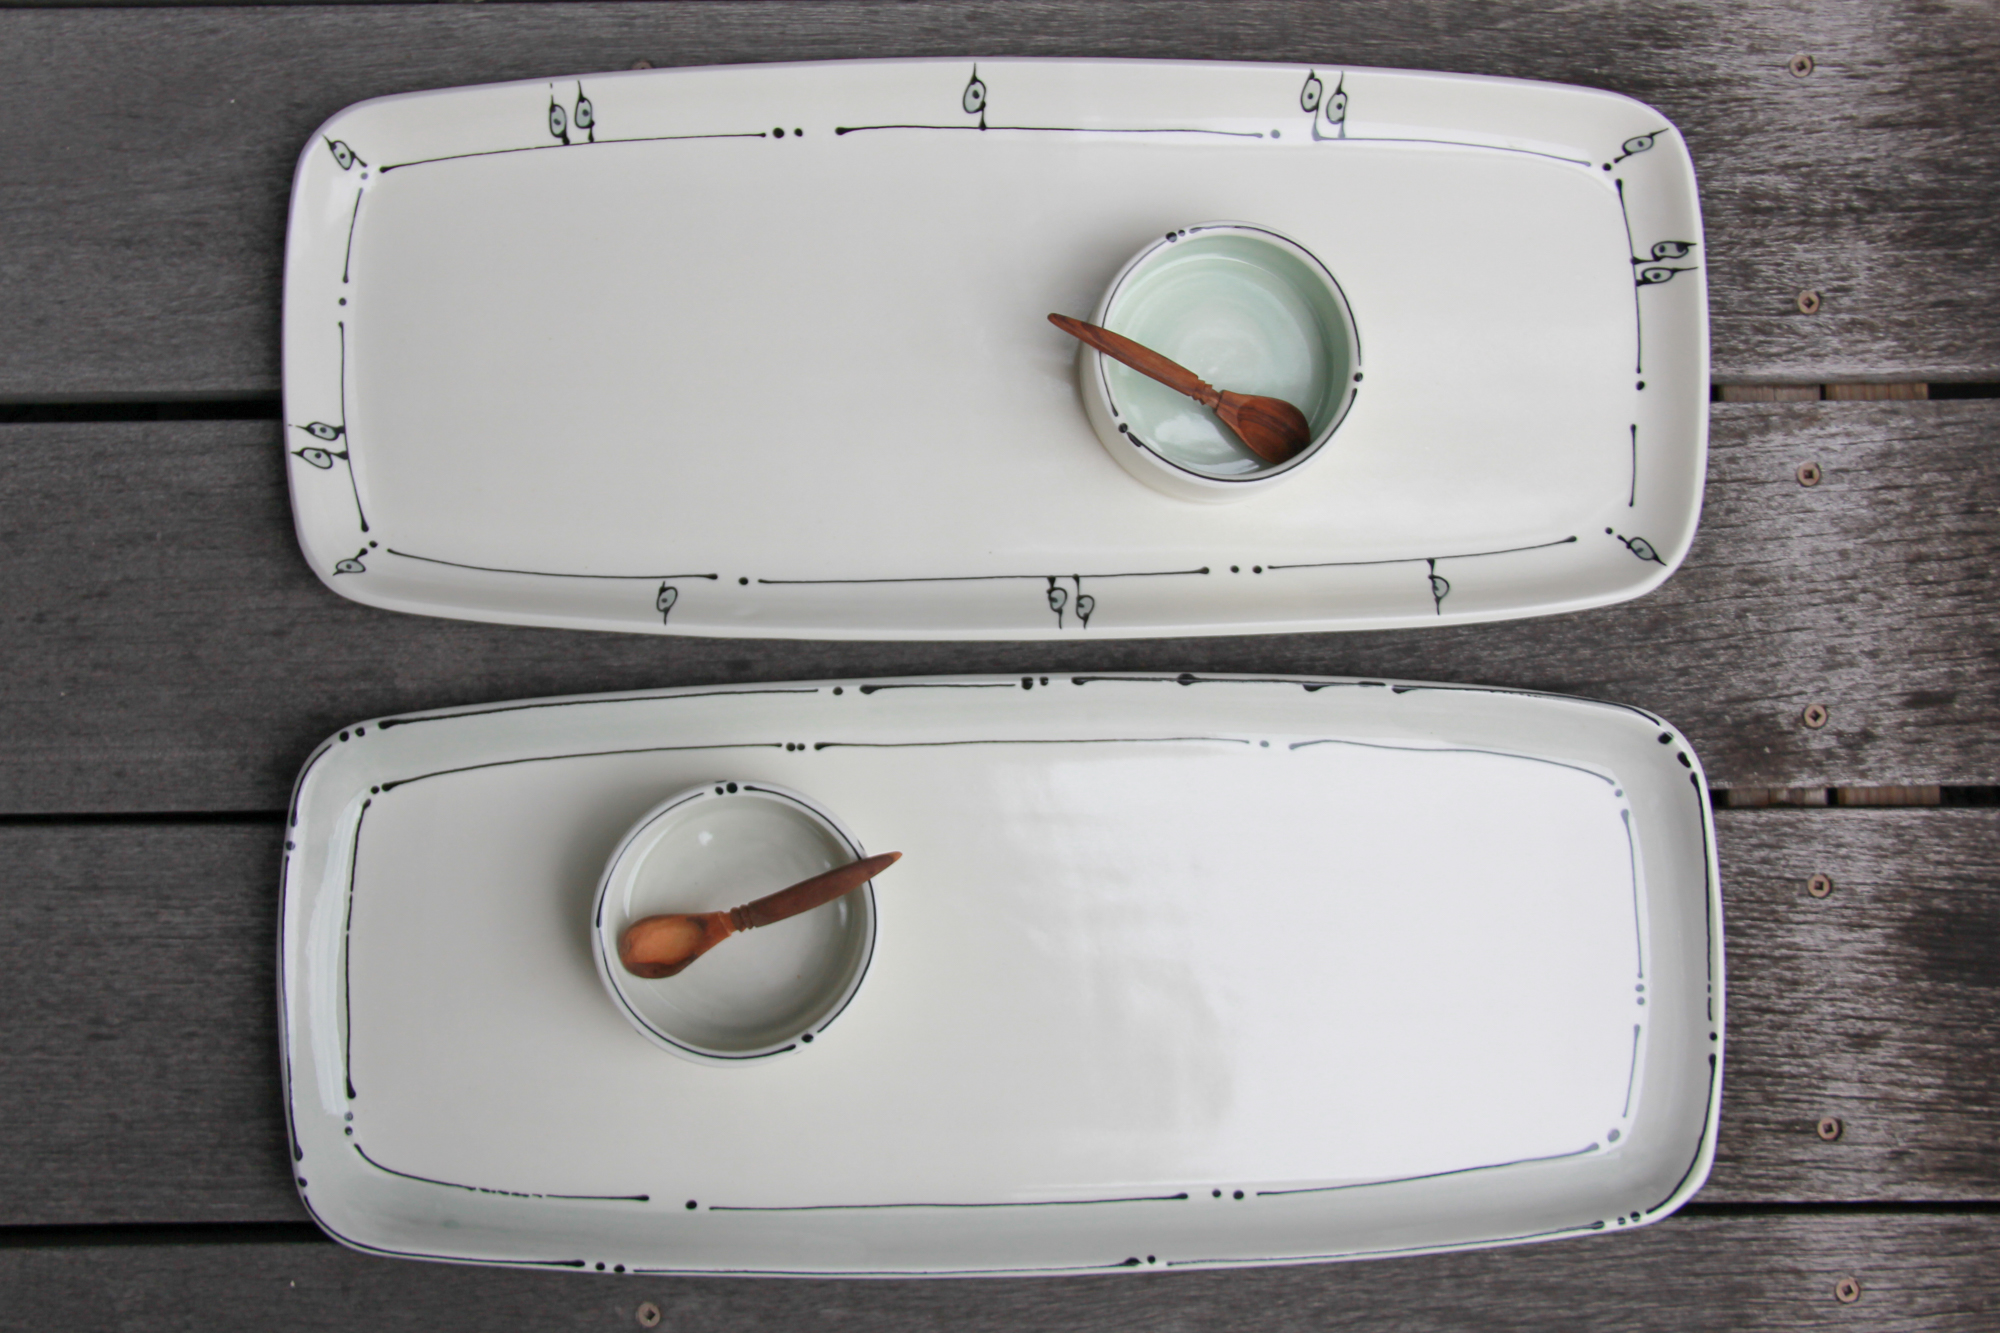 Iris Dorton: Large Tray with Circle Dot Motif, comes with Wood Spoon and Dish Product Image 3 of 7